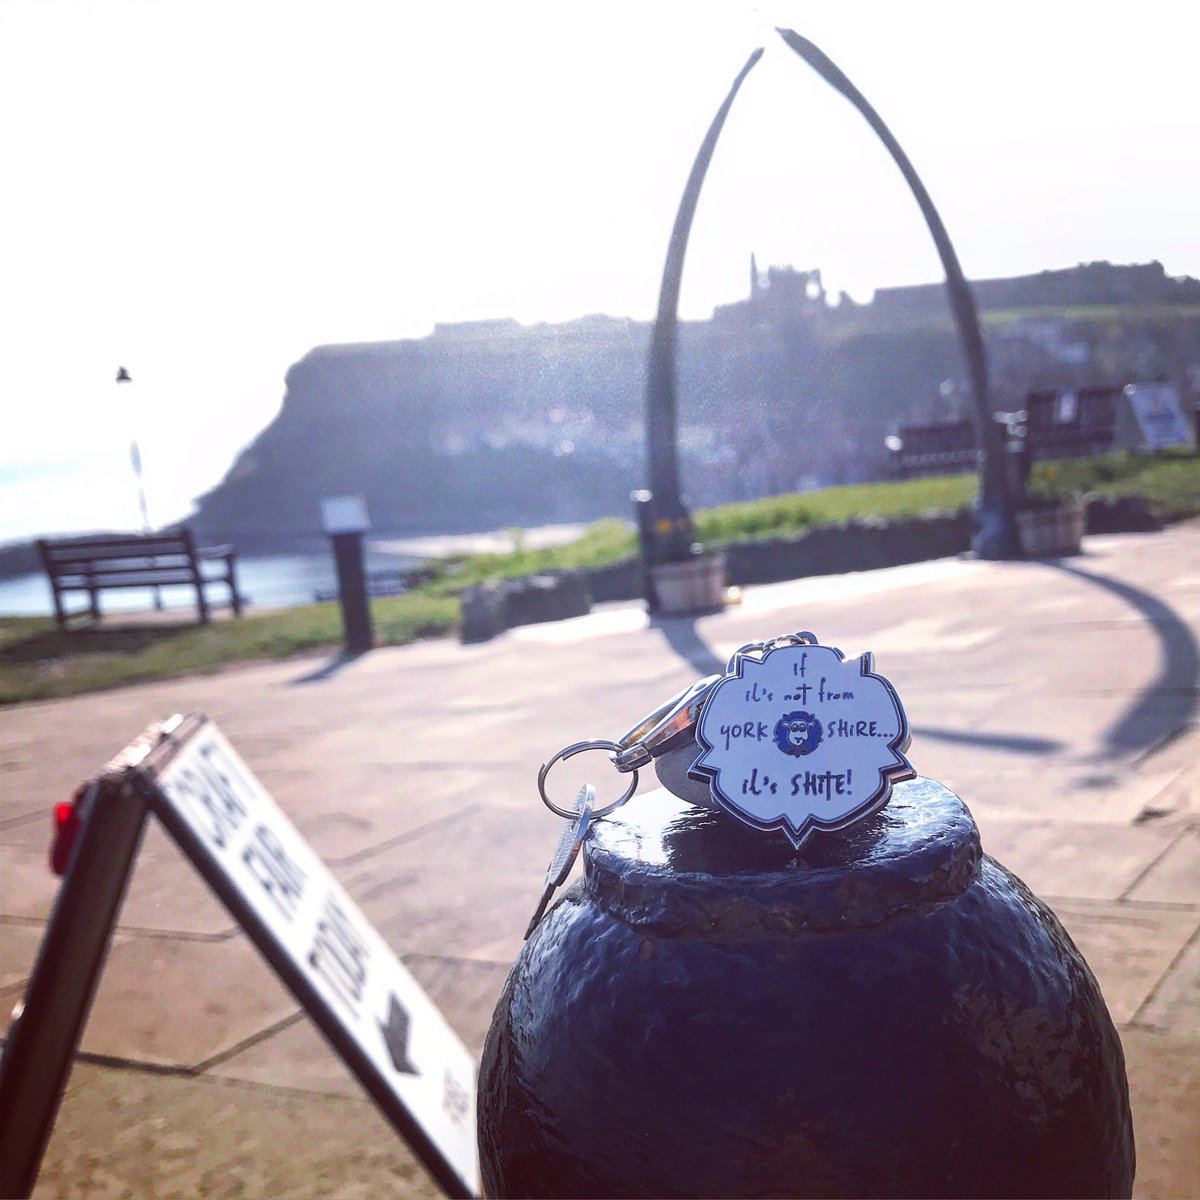 Happy Easter from the glorious sunny Yorkshire coast 😎 Day 2 for us at Whitby Pavilion with the Dippy Craft Fair. If you’re in the area today pop in and say hello. 50 stalls & free entry #magcessory #fashionaccessory #inspiredbyyorkshire #shite #britishdesign 🇬🇧 #sheep 🐑